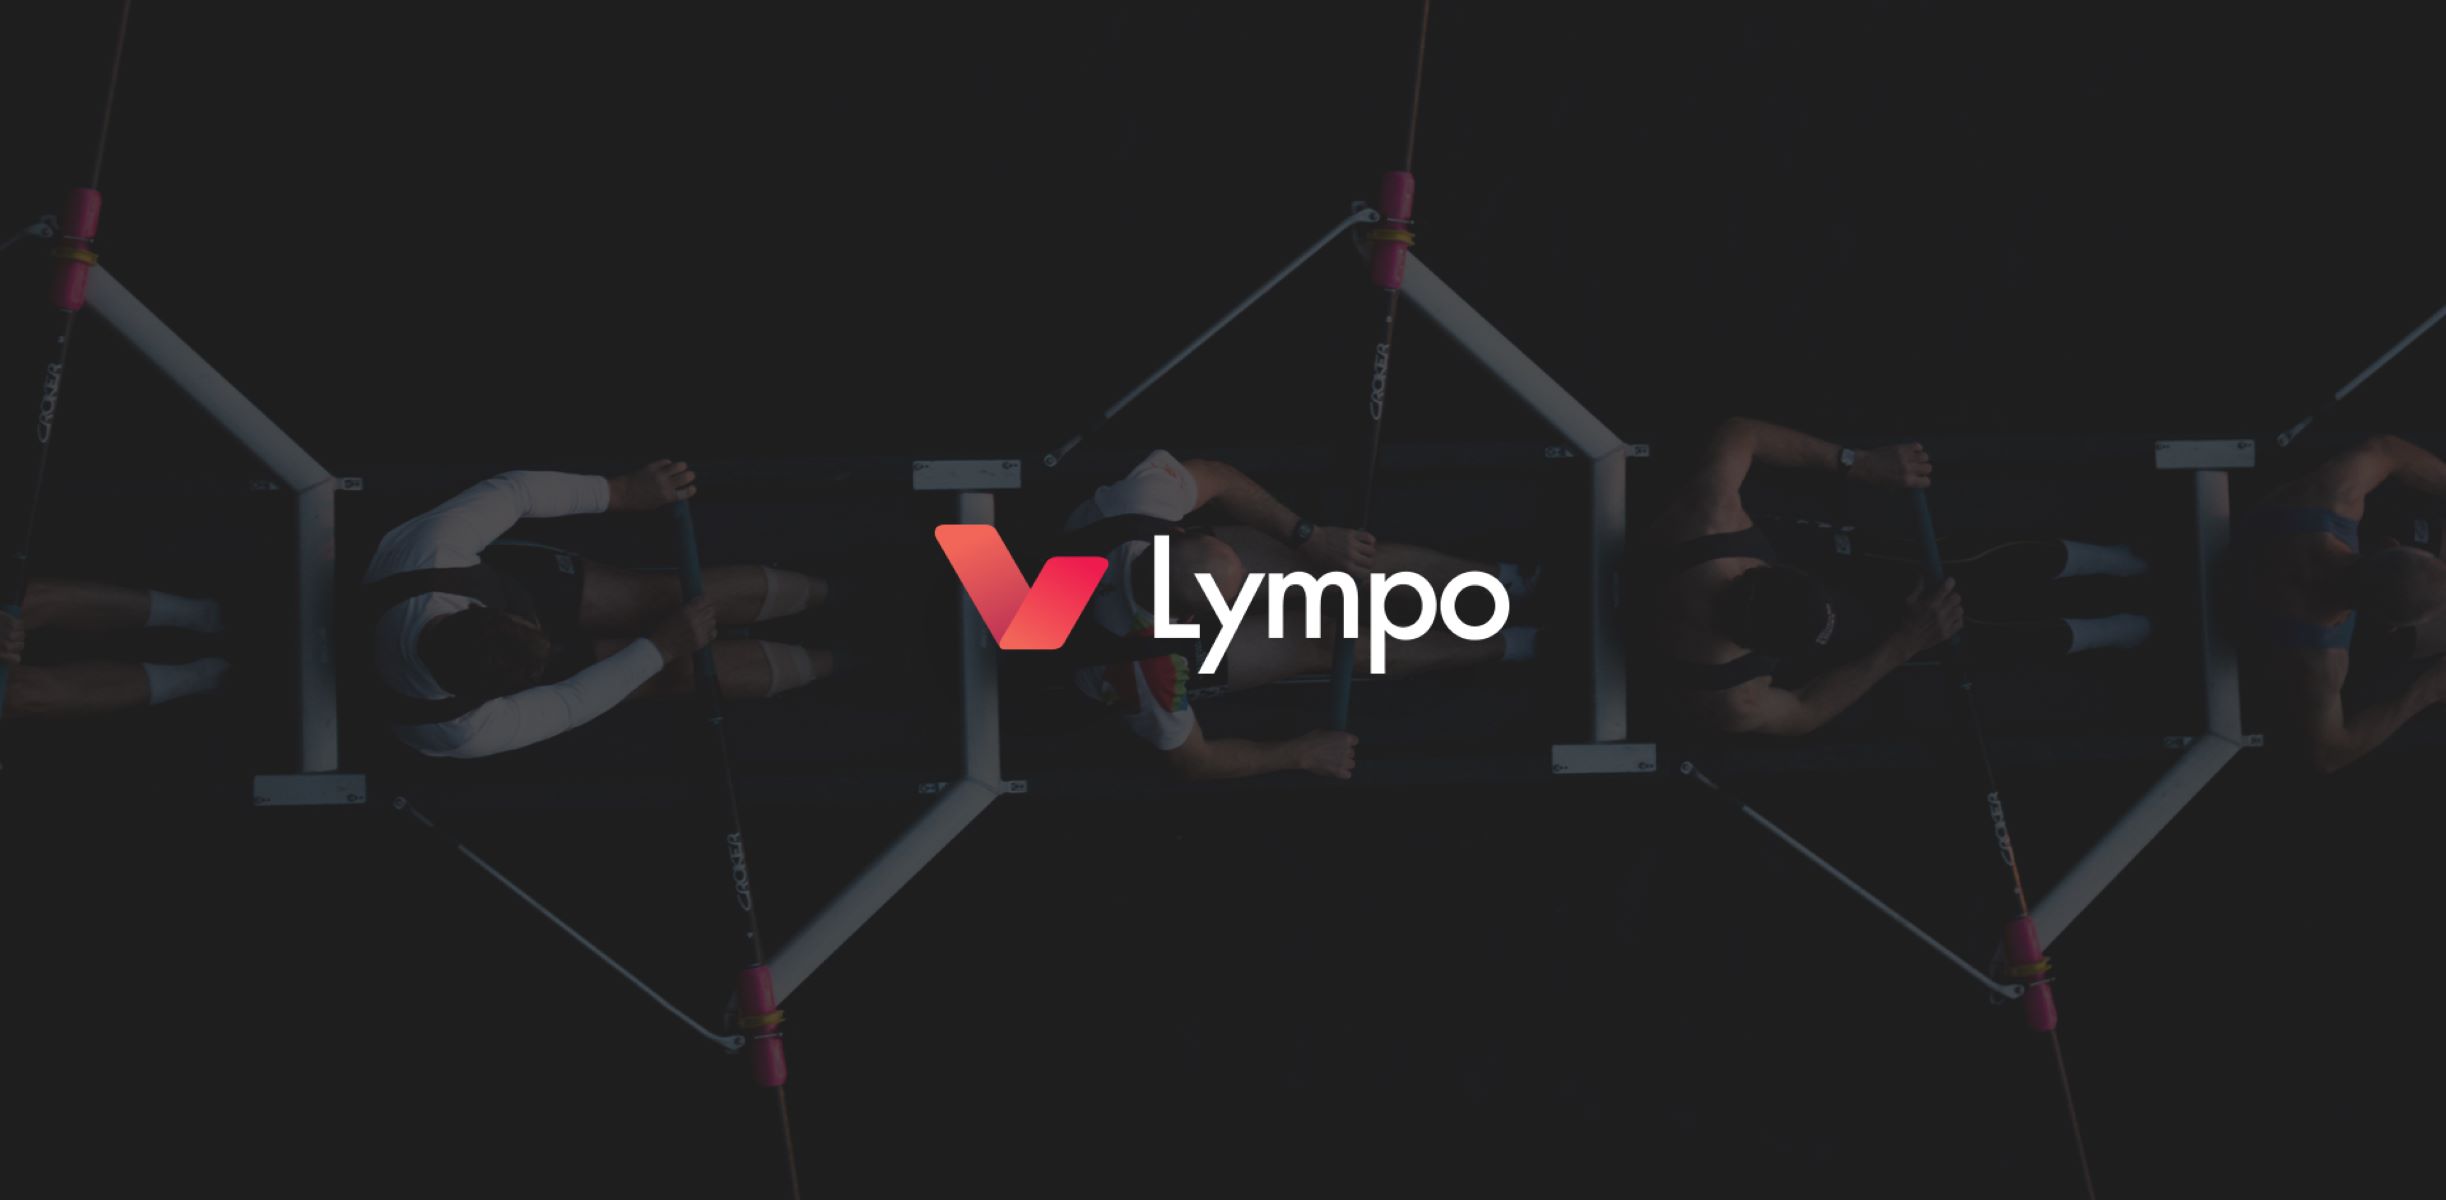 17-extraordinary-facts-about-lympo-lym